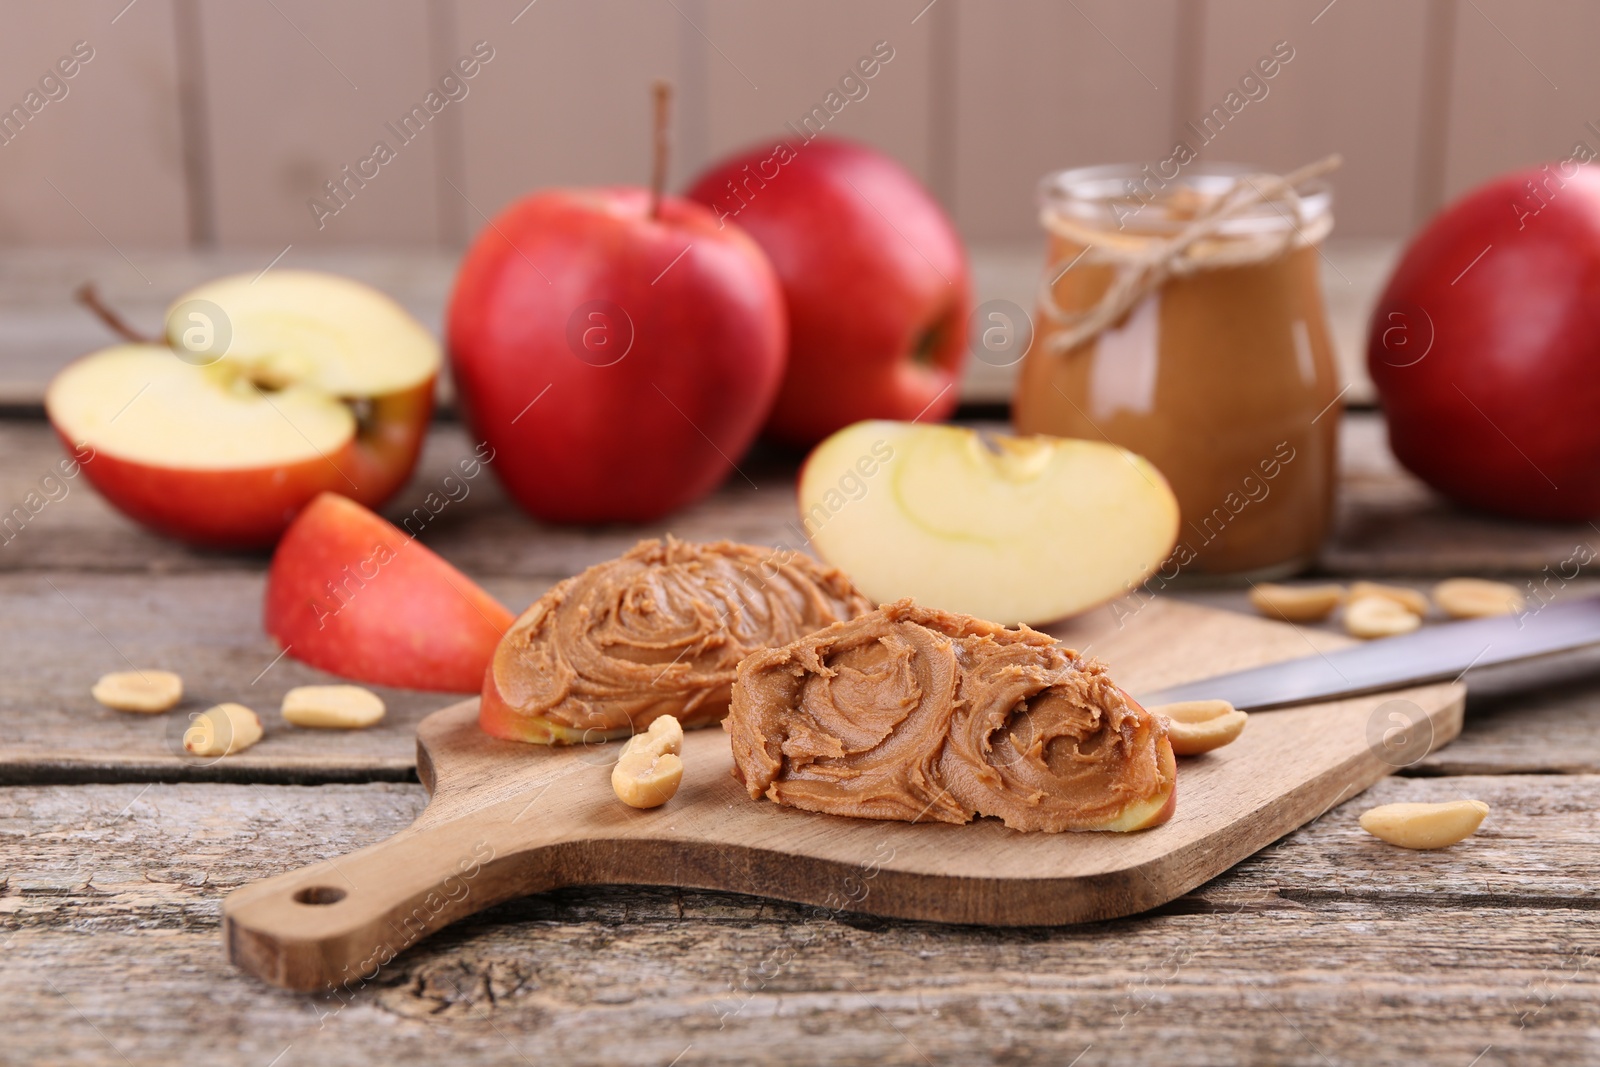 Photo of Fresh apples with peanut butter on wooden table